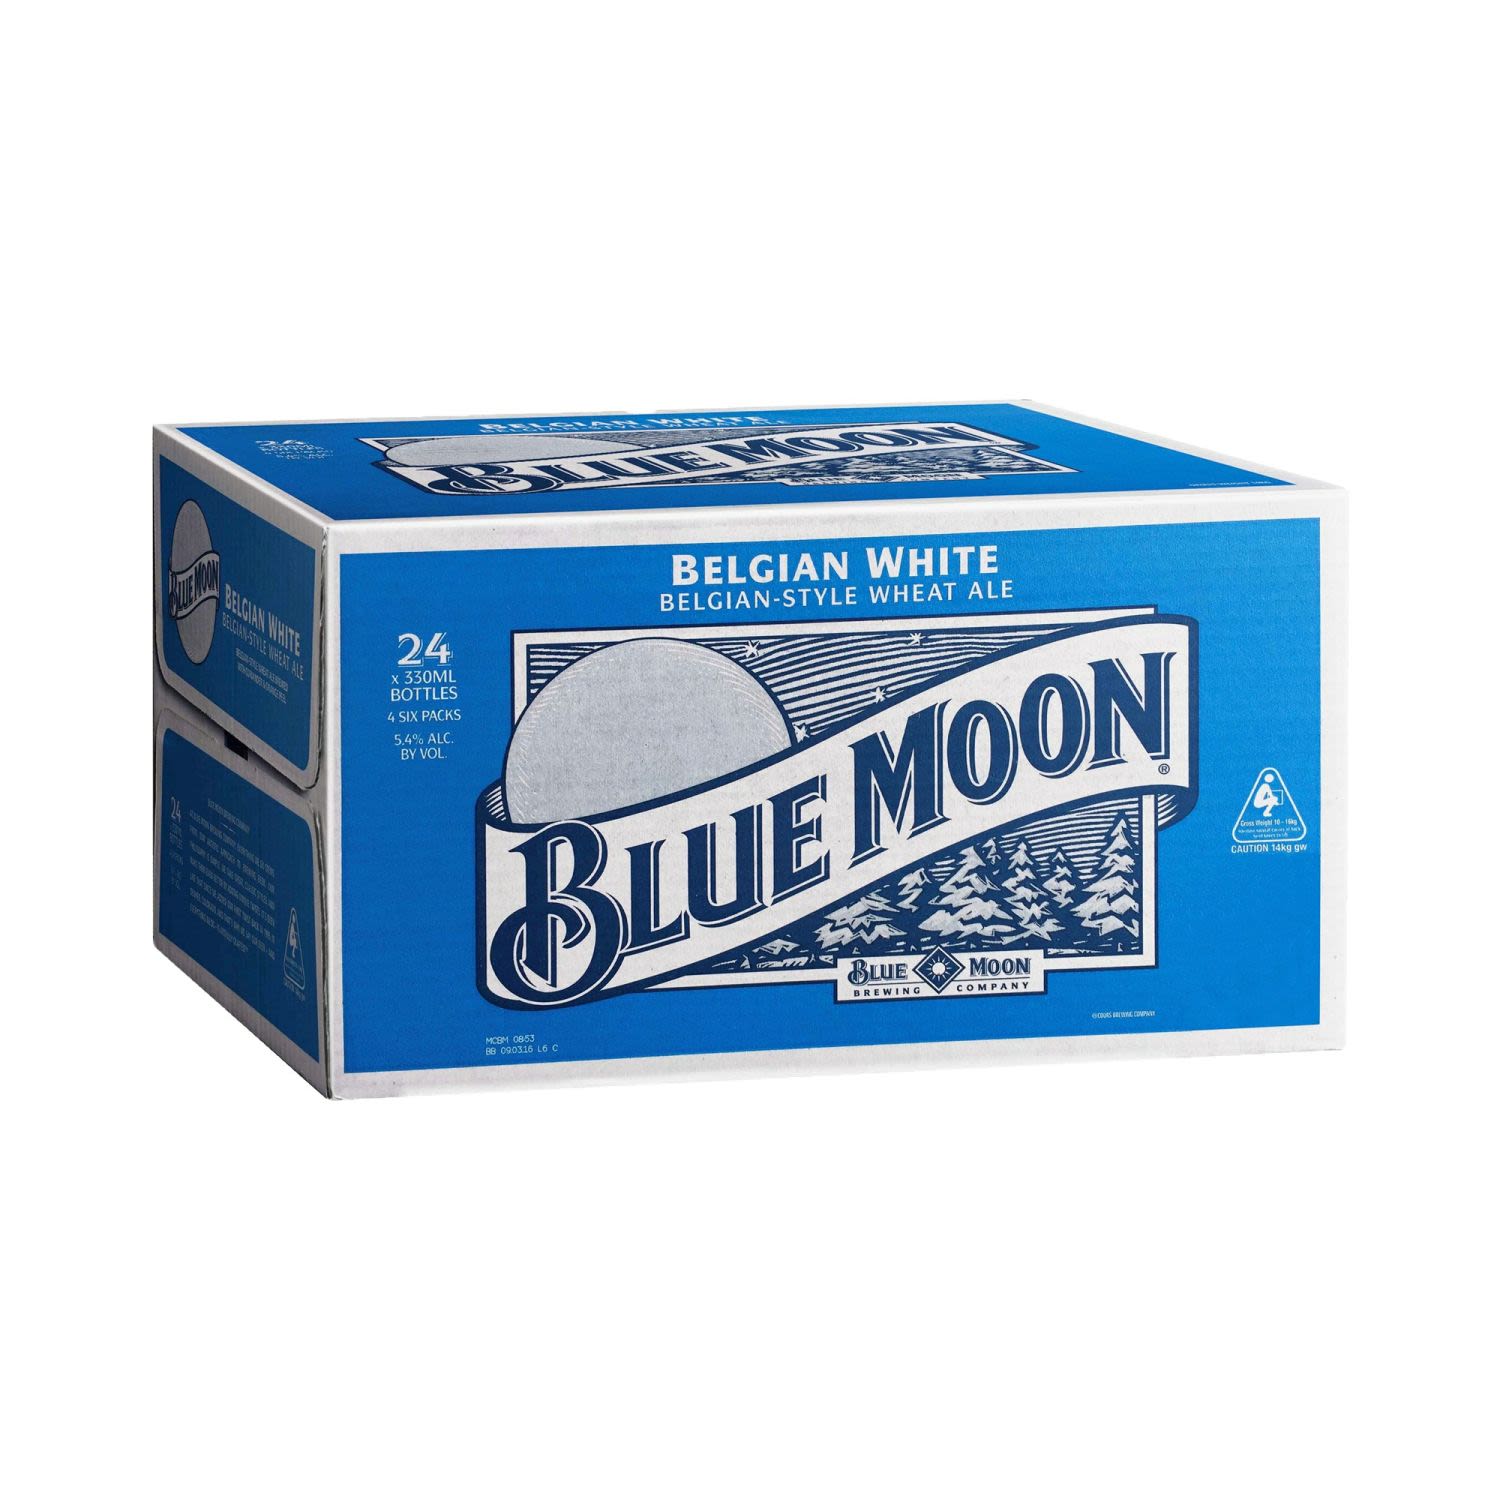 Blue Moon is a delicious handcrafted beer.<br /> <br />Alcohol Volume: 5.40%<br /><br />Pack Format: 24 Pack<br /><br />Standard Drinks: 1.5</br /><br />Pack Type: Bottle<br /><br />Country of Origin: USA<br />